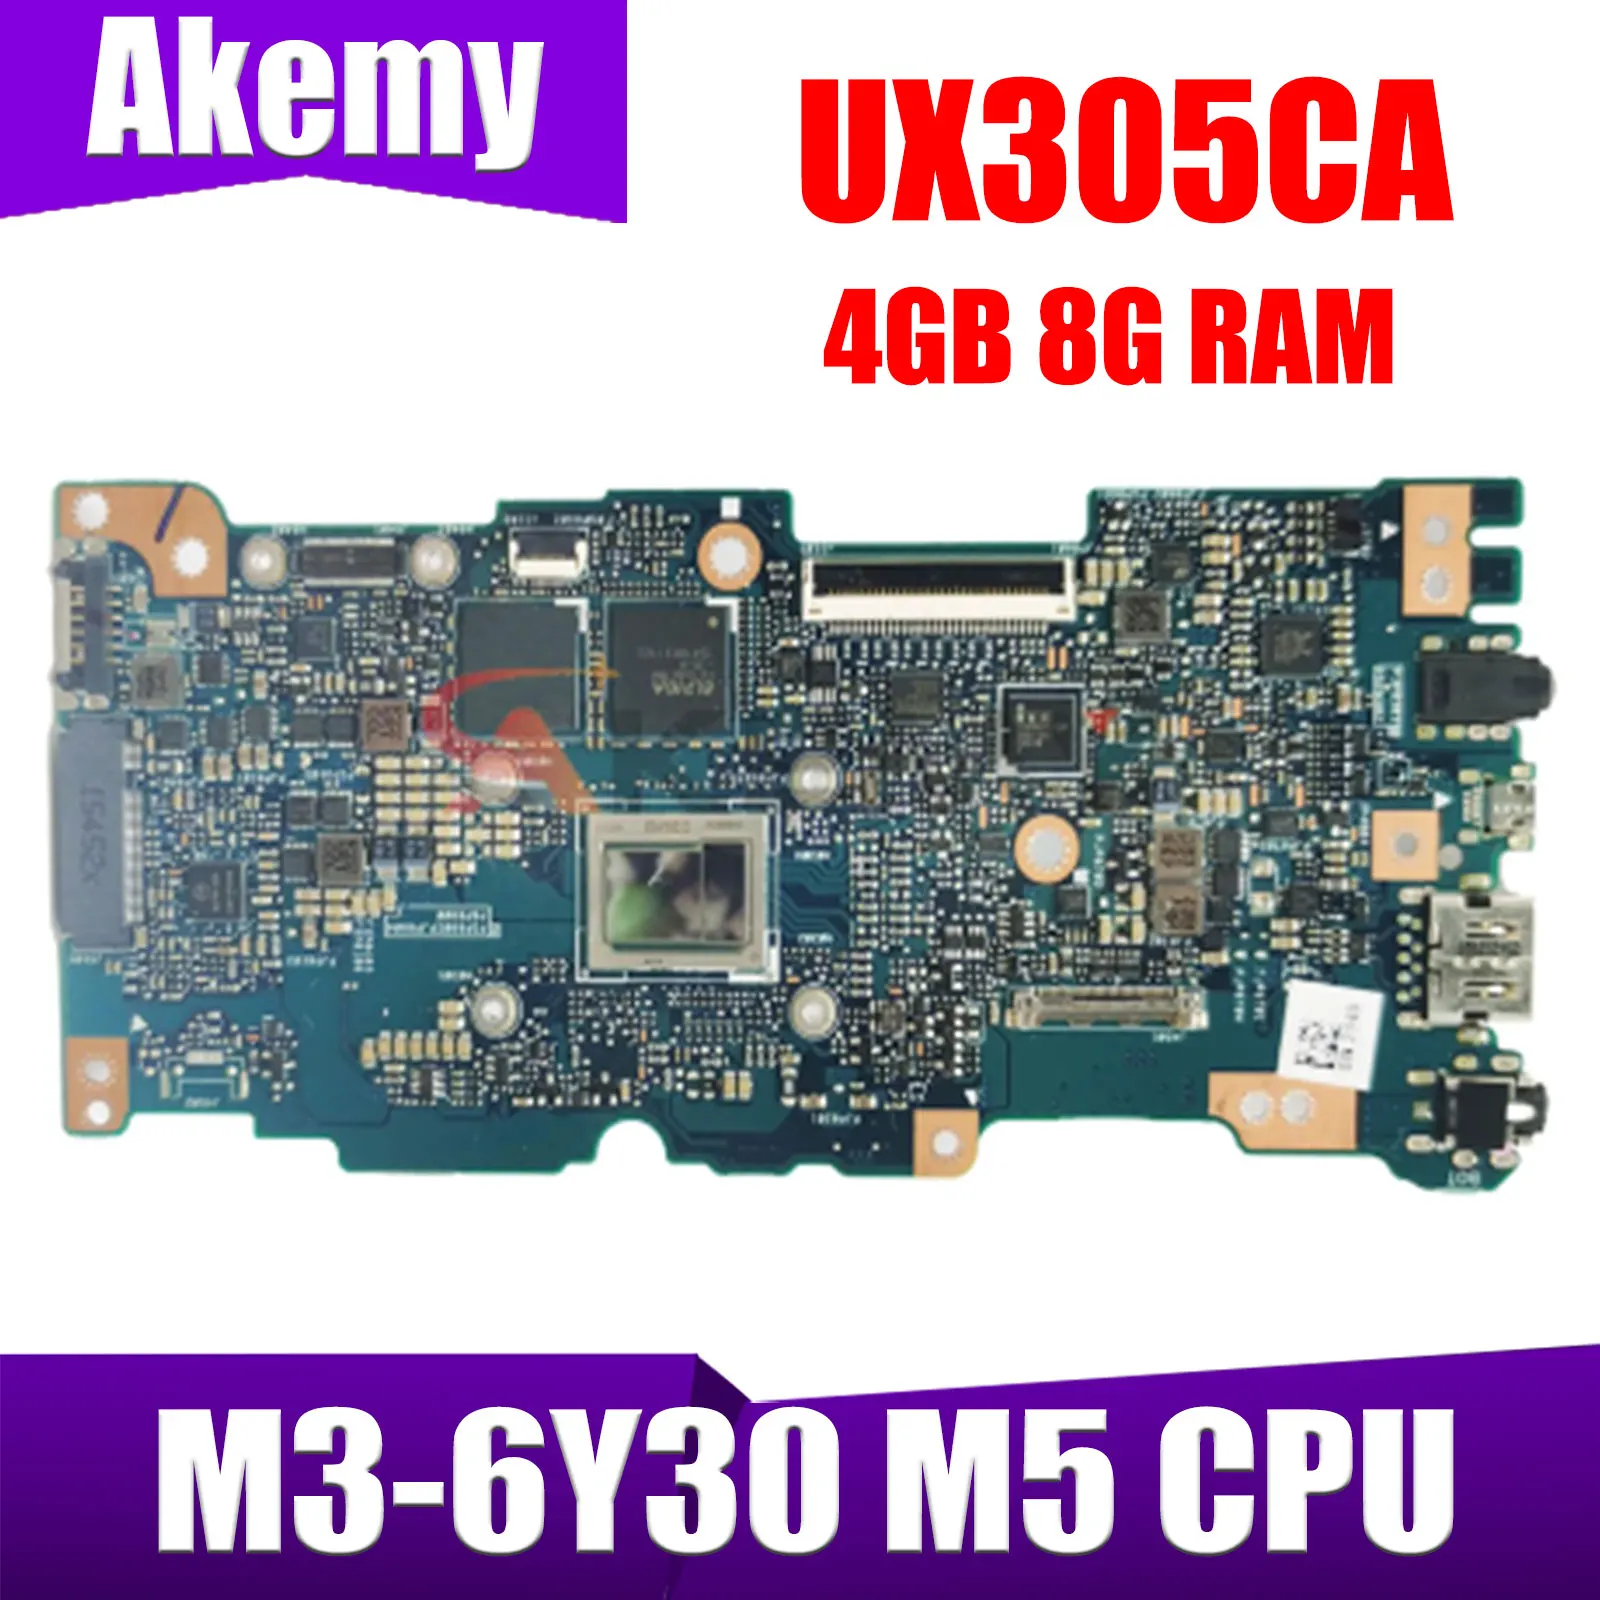 

UX305CA With M3-6Y30 M5 CPU 4GB 8G RAM MAINboard REV 2.0 for ASUS Zenbook U305C UX305 UX305C Laptop Motherboard 100% tested